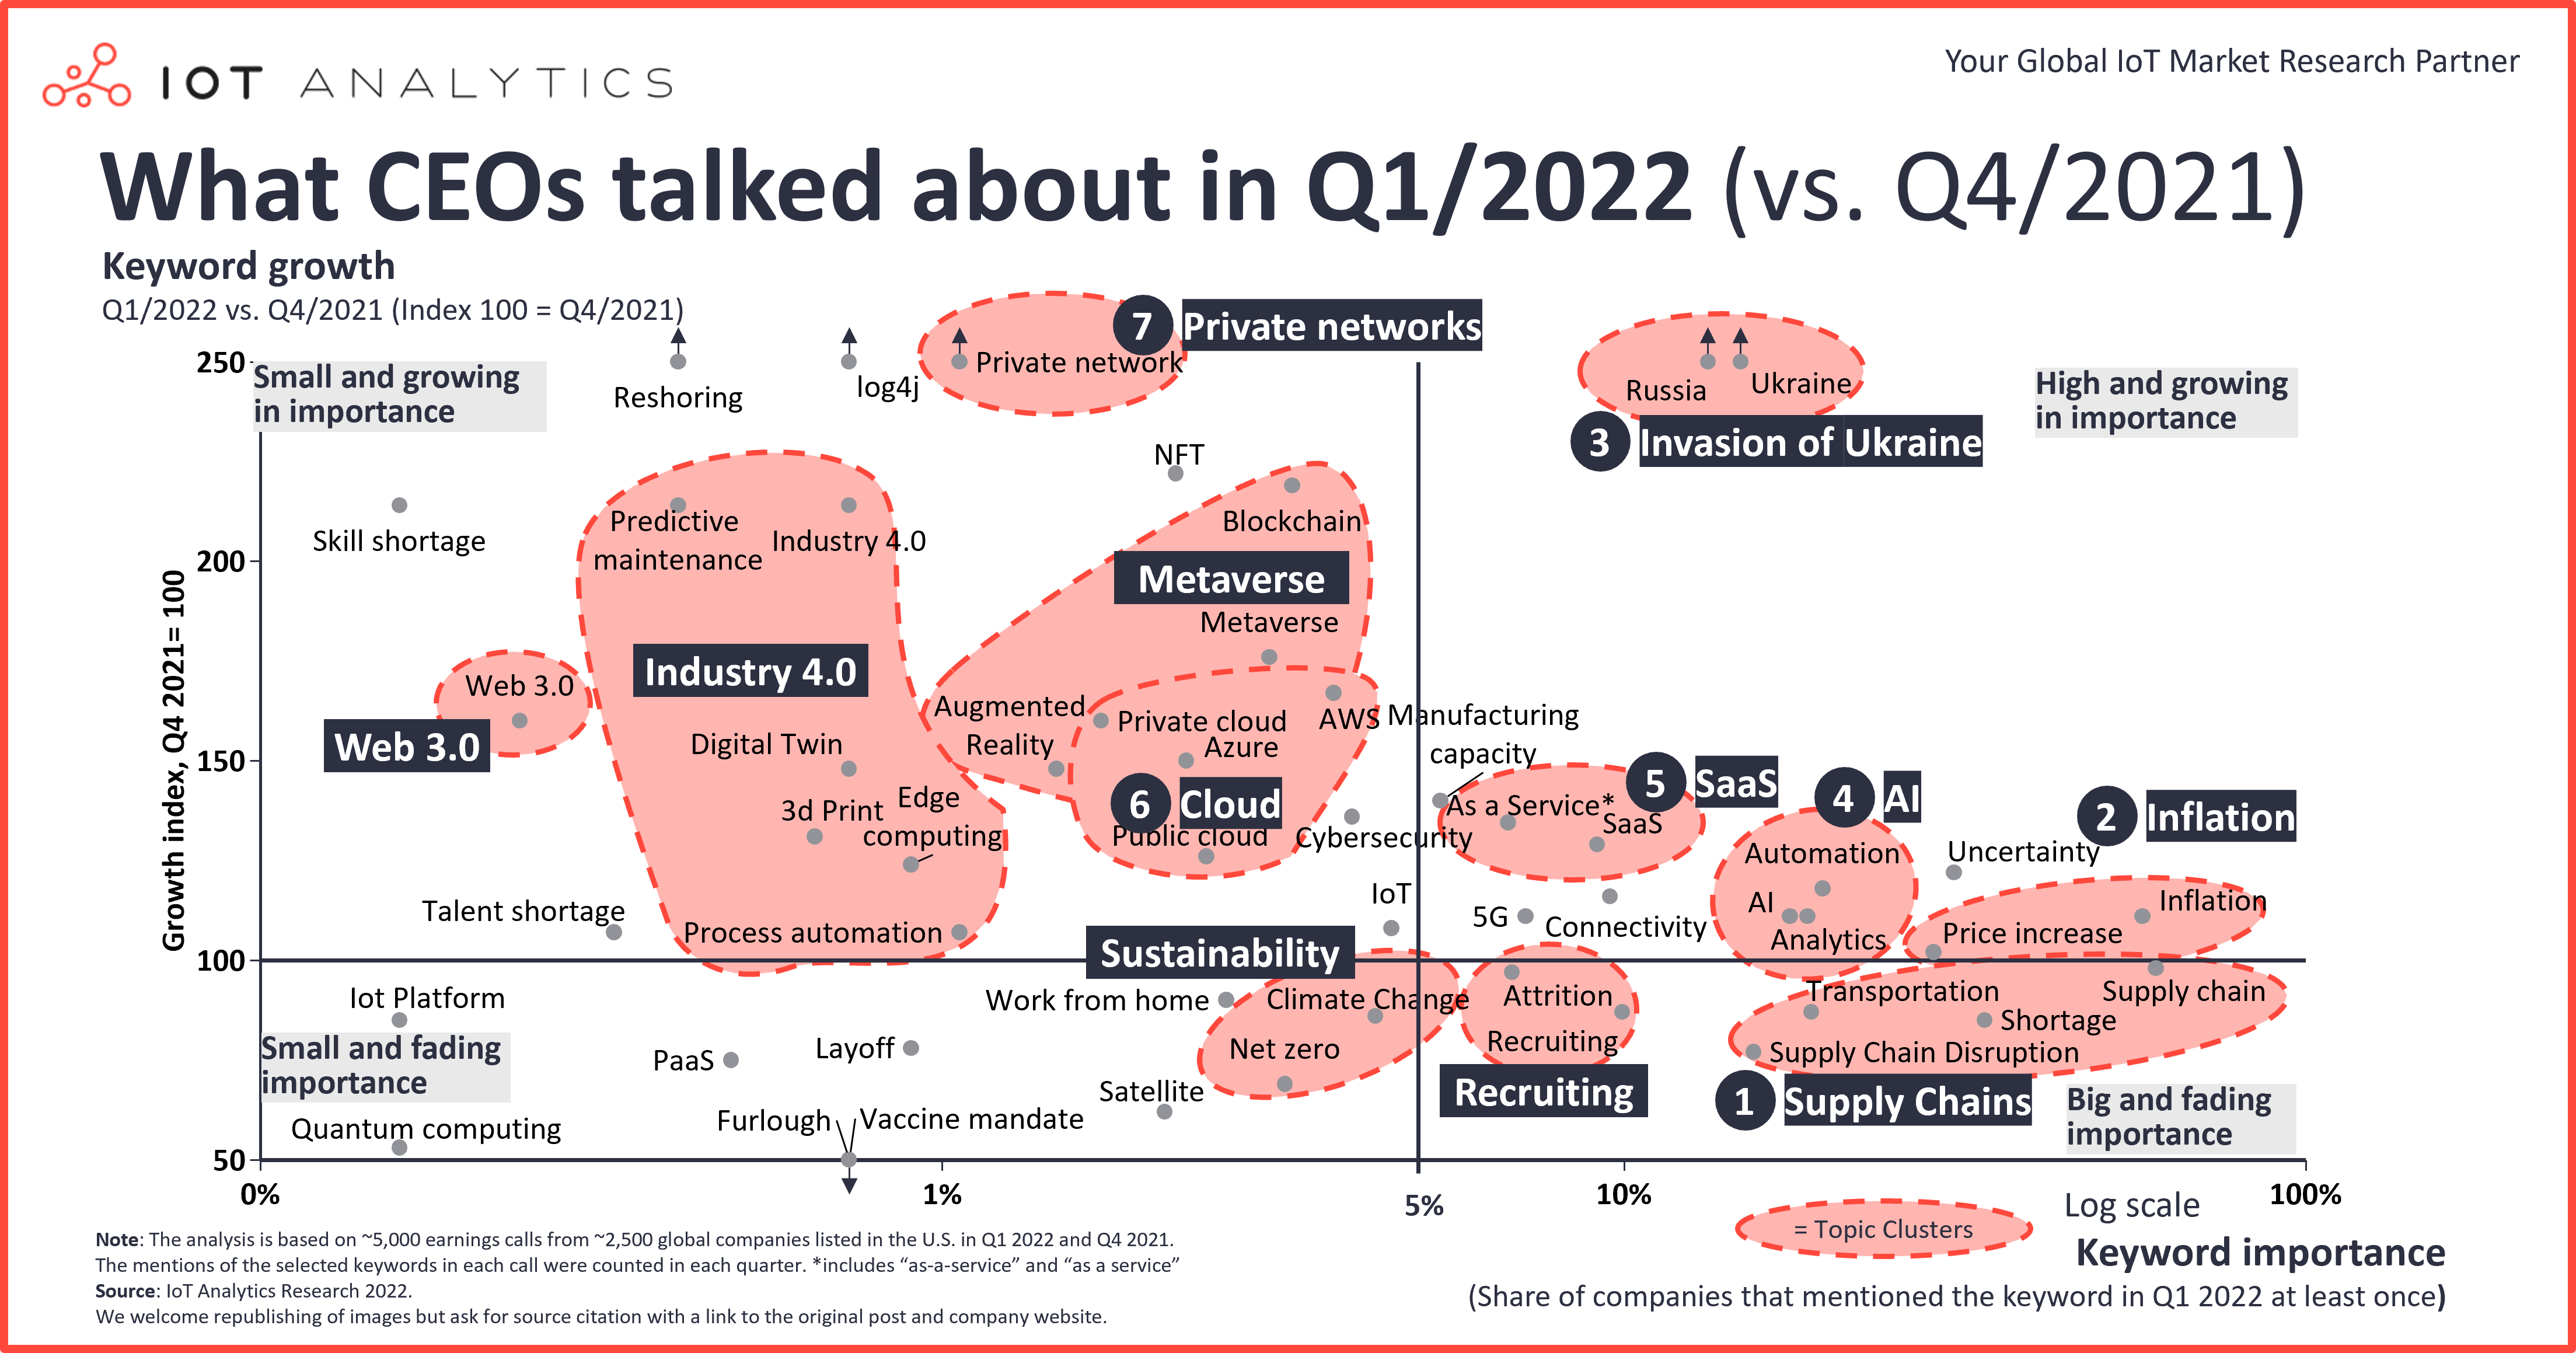 What CEOs talked about in Q1 2022 vs Q4 2021